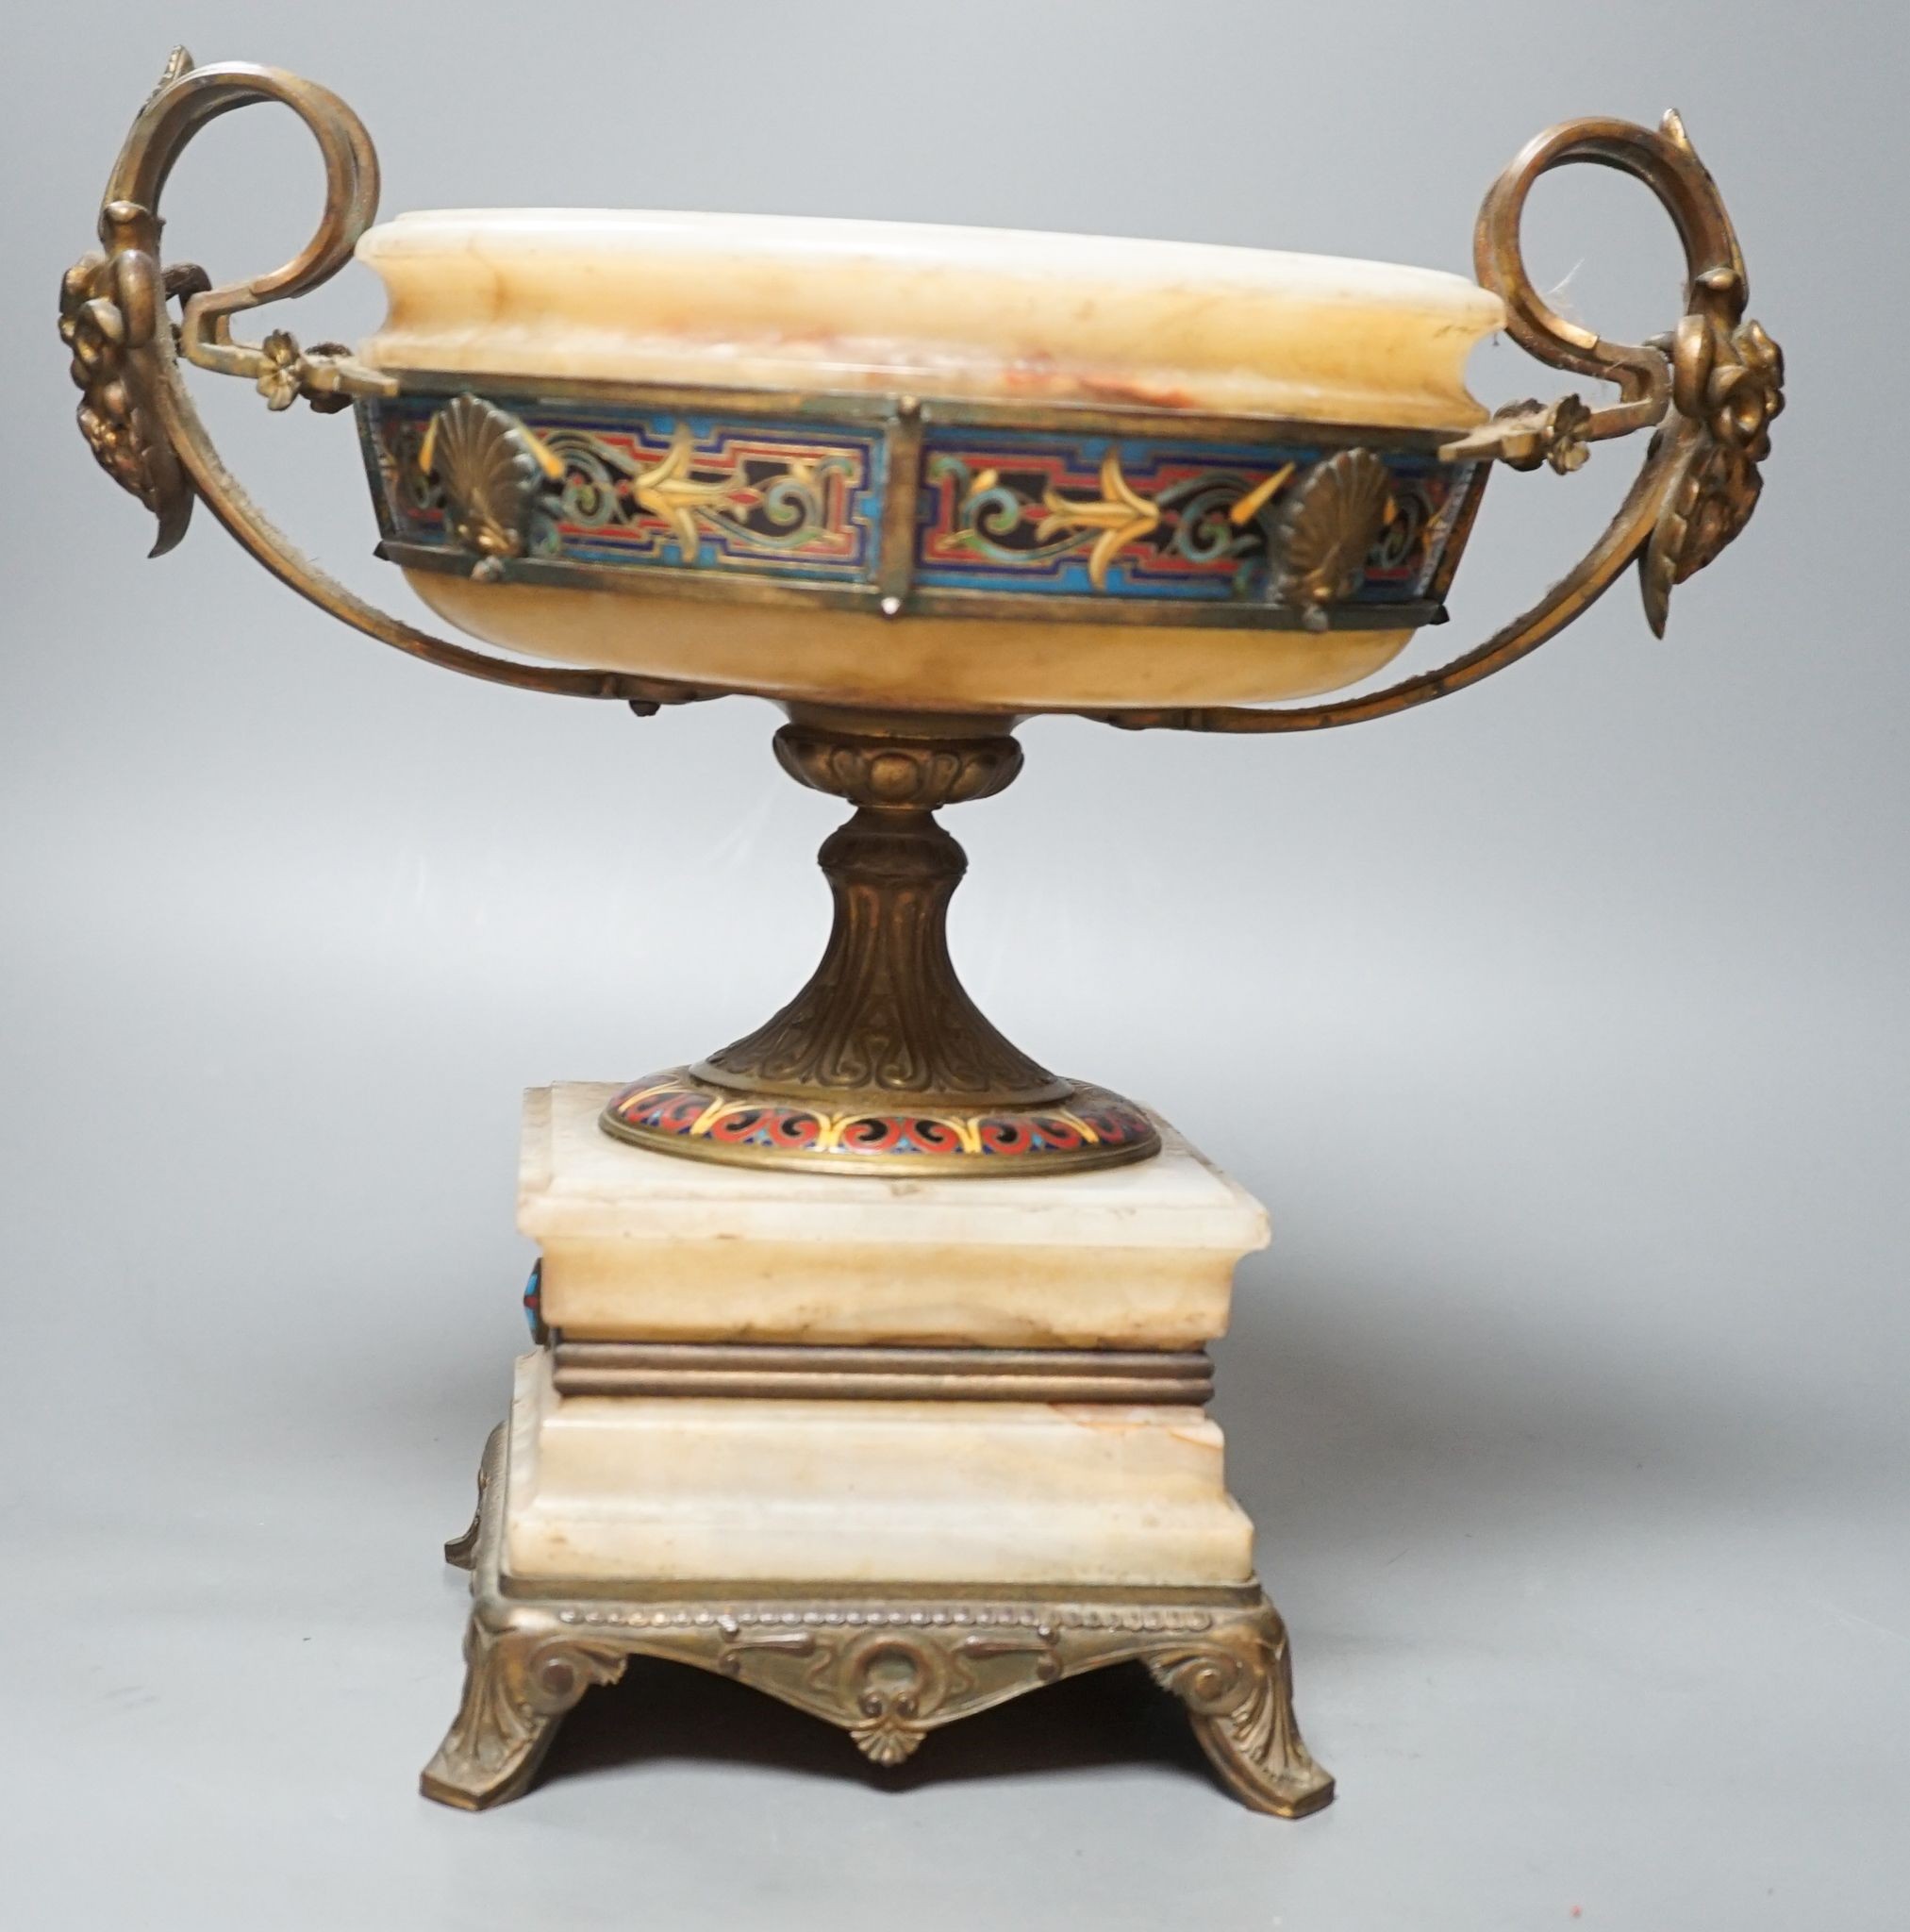 A late 19th century Barbedienne ormolu, champleve enamel and onyx centrepiece 30cm, engraved mark ‘F BARBEDIENNE’